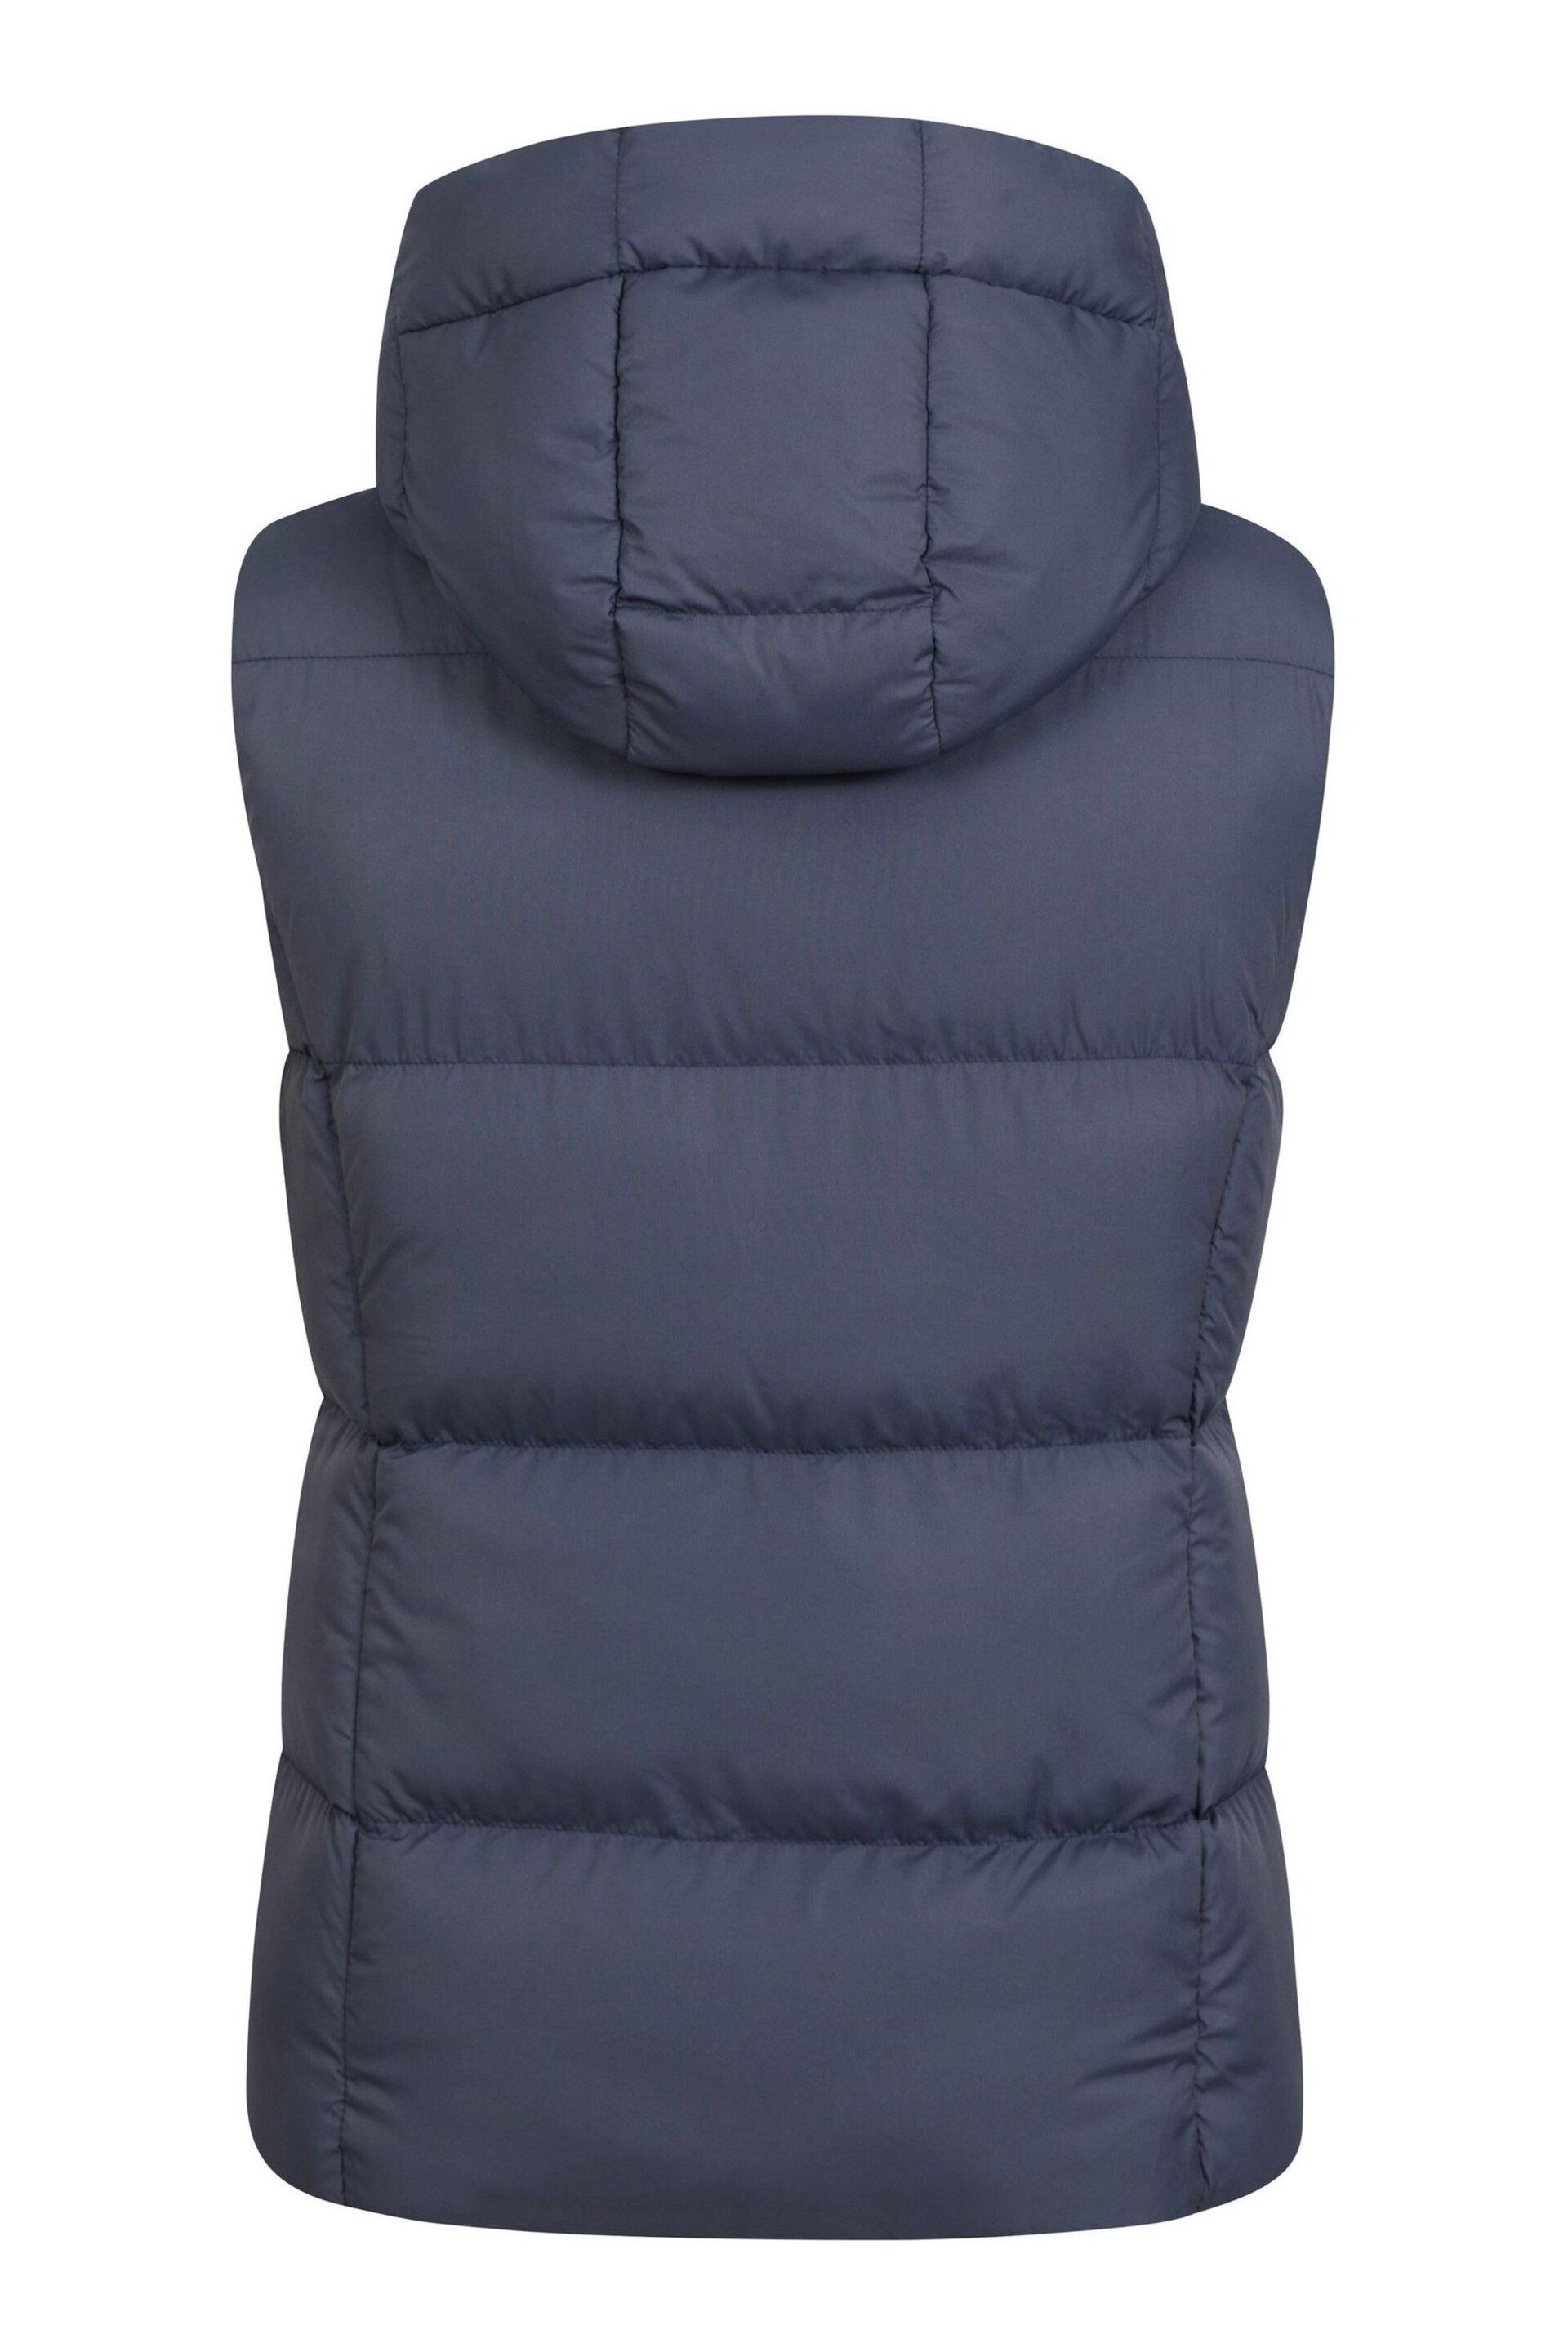 Mountain Warehouse Blue Astral Womens Padded Gilet - Image 2 of 6